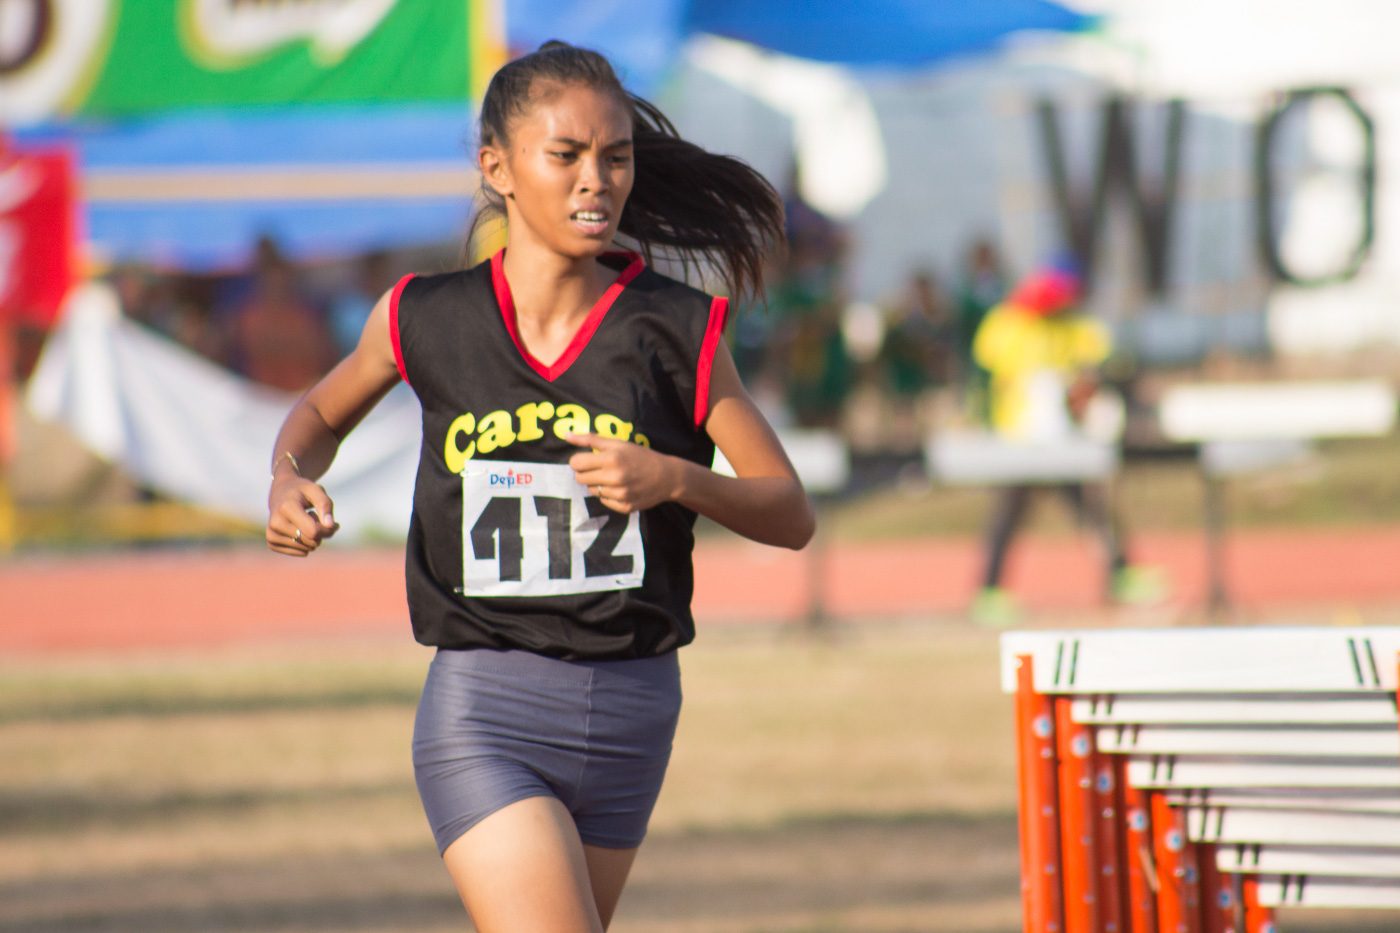 BEAUTY IN THE BEST. An athlete from Caraga region proves that she can be included in the best time of athletics as she travels miles away to be one of the best of her region even in Palarong Pambansa 2017 athletic event  